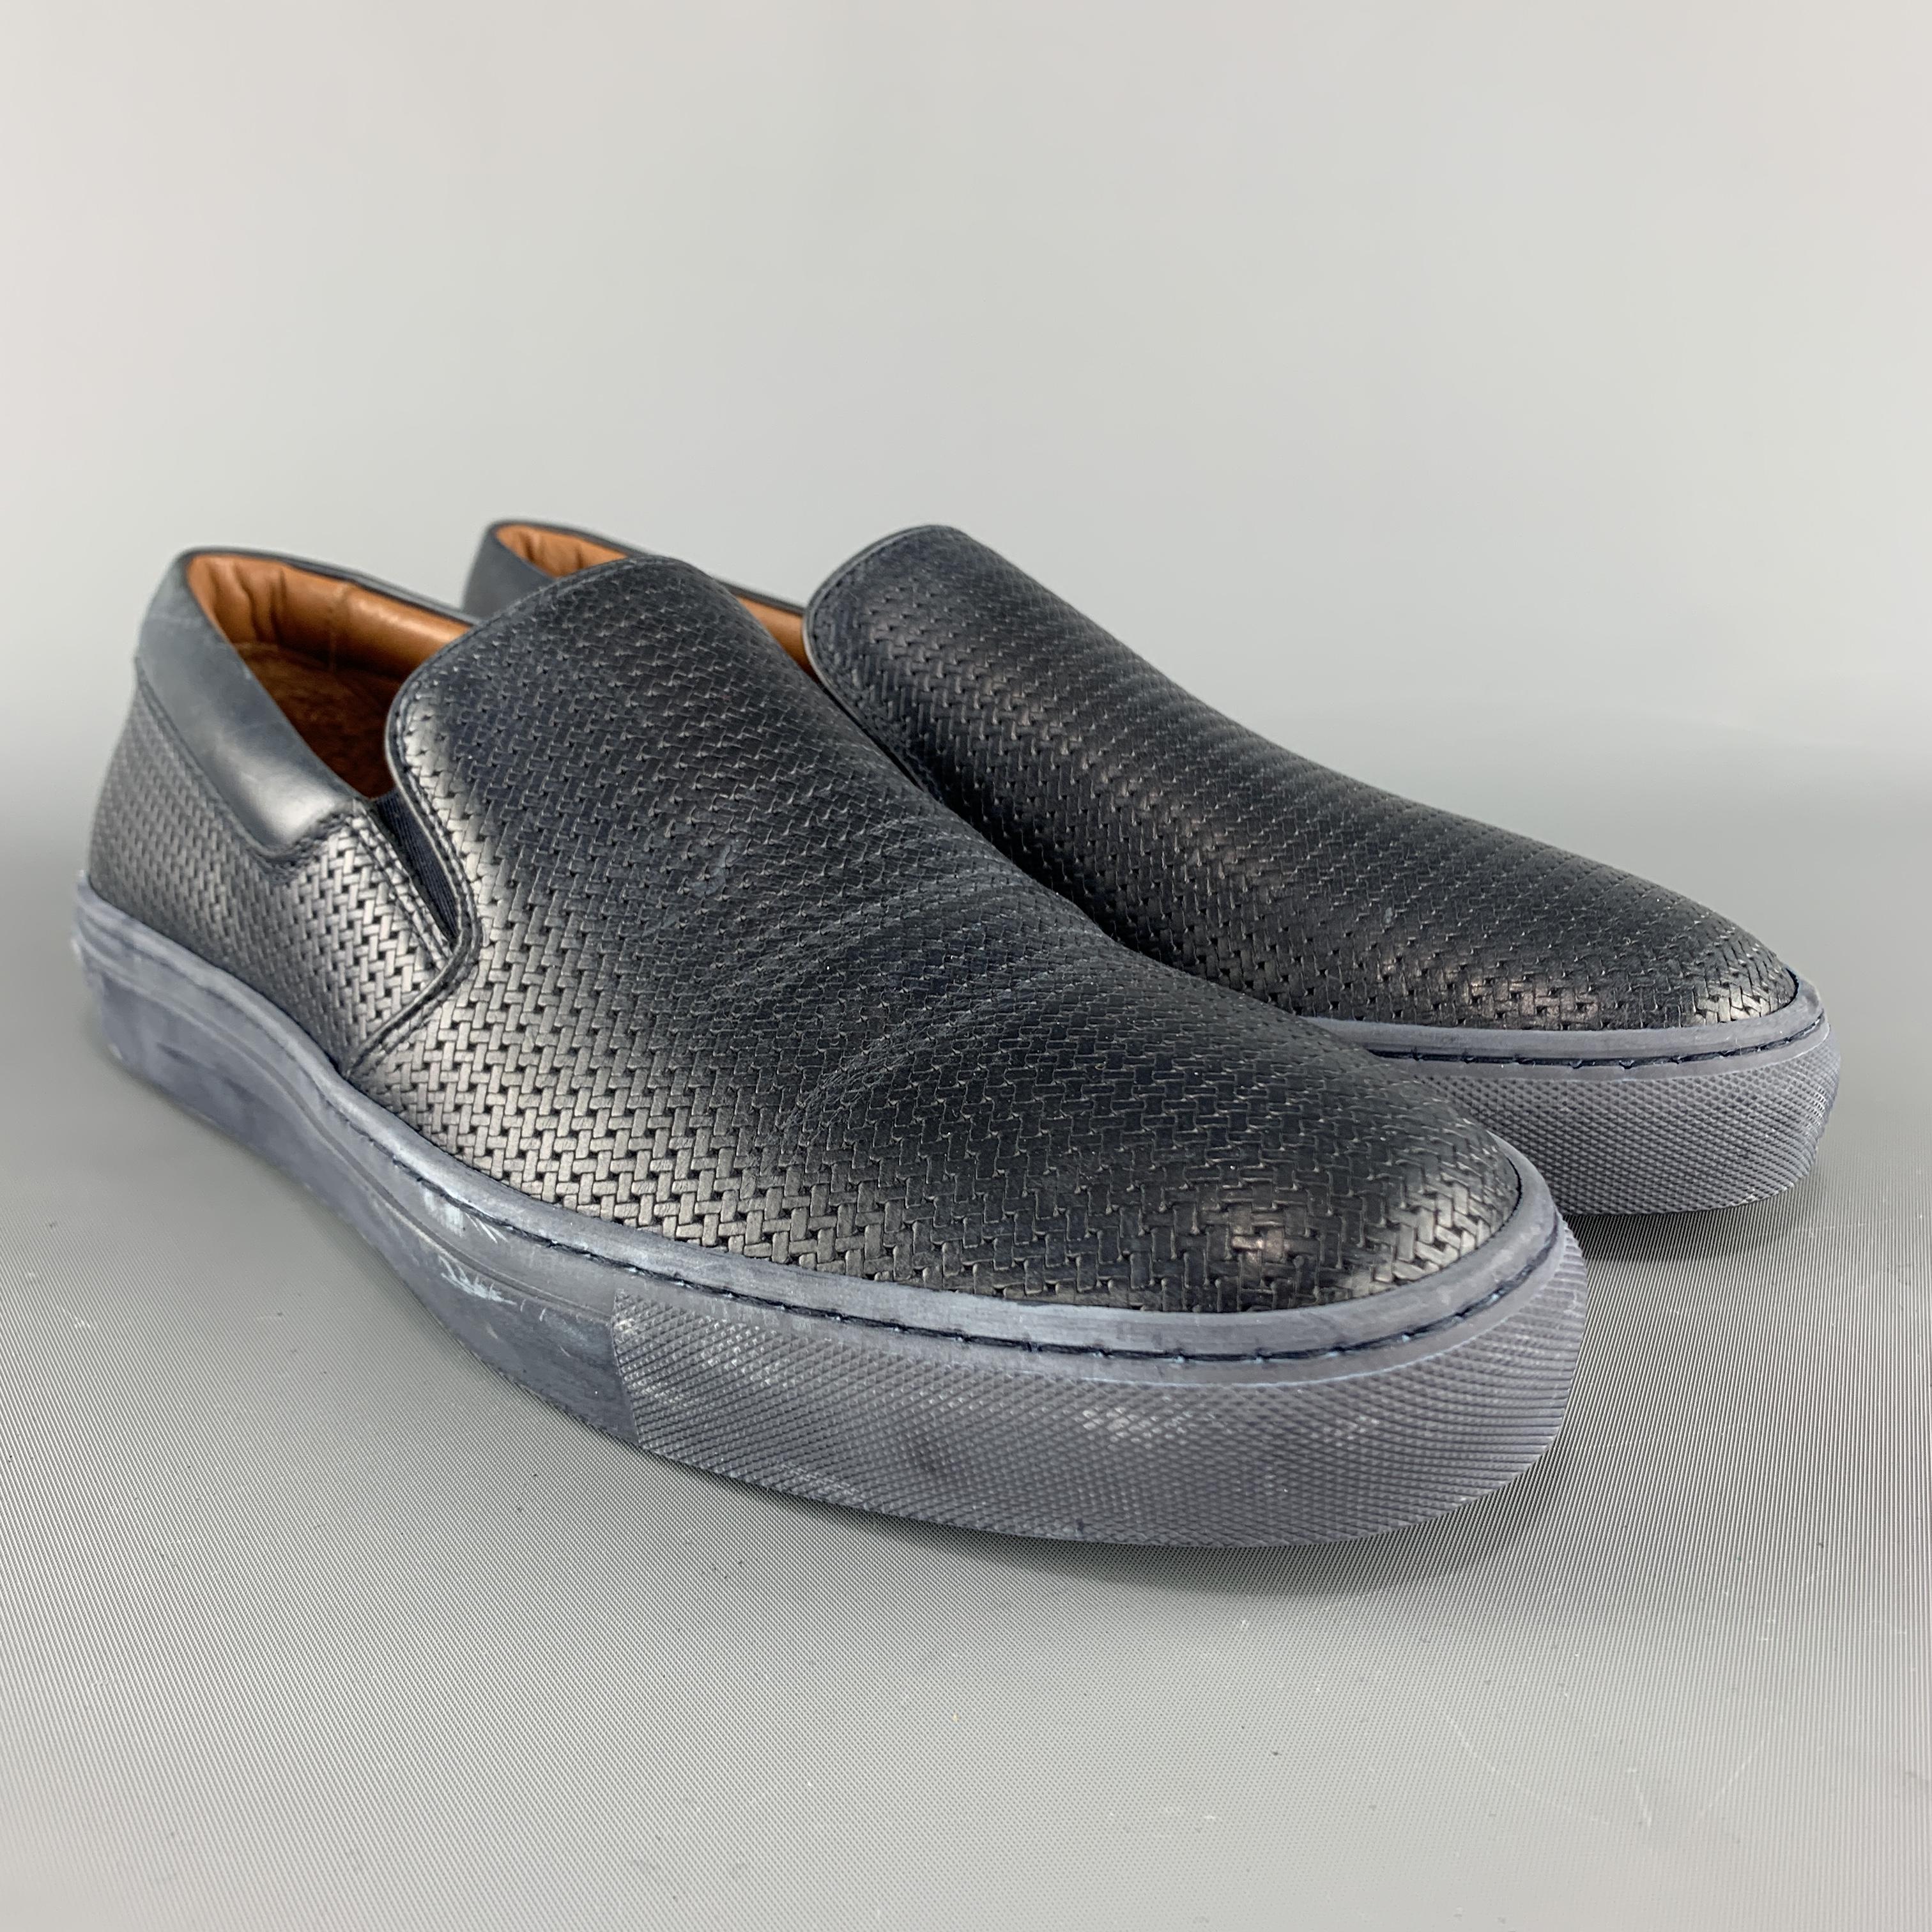 AQUATALIA slip on sneakers come in navy woven leather with a tonal rubber sole. Wear throughout. Made in Italy.

Good Pre-Owned Condition.
Marked: US 10

Outsole: 11.75 x 4 in.